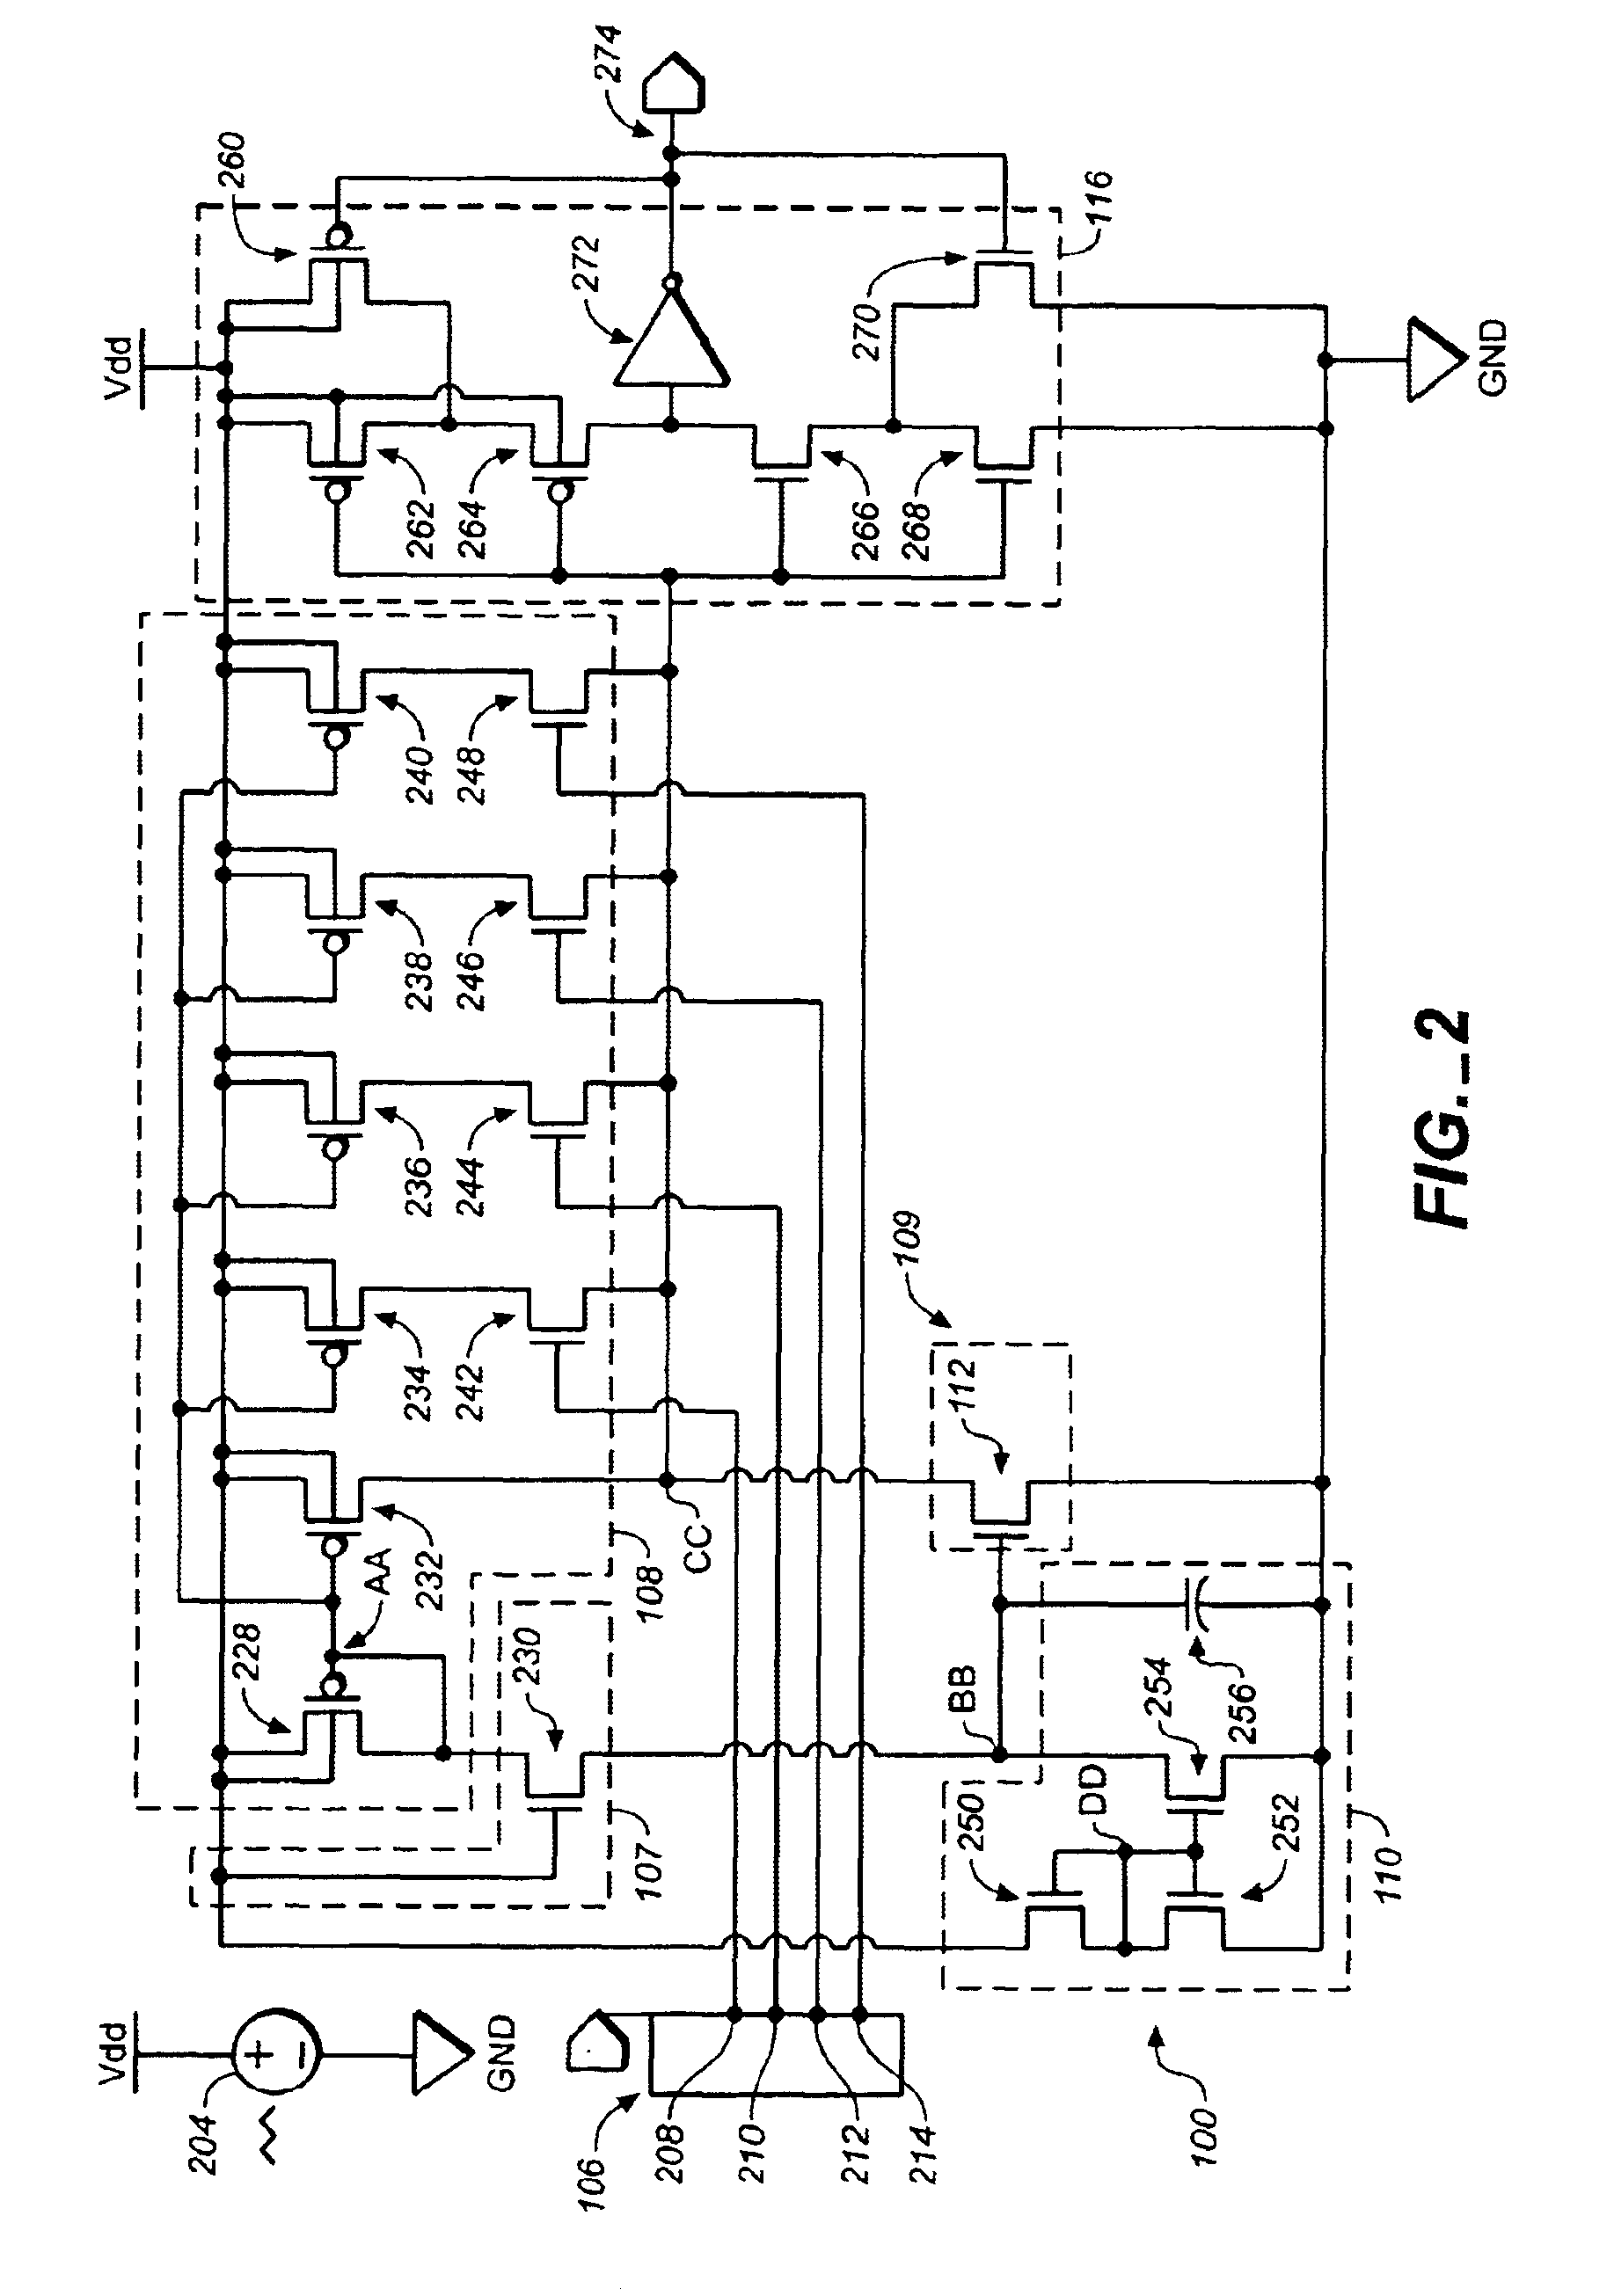 Voltage detector circuit with a programmable threshold point